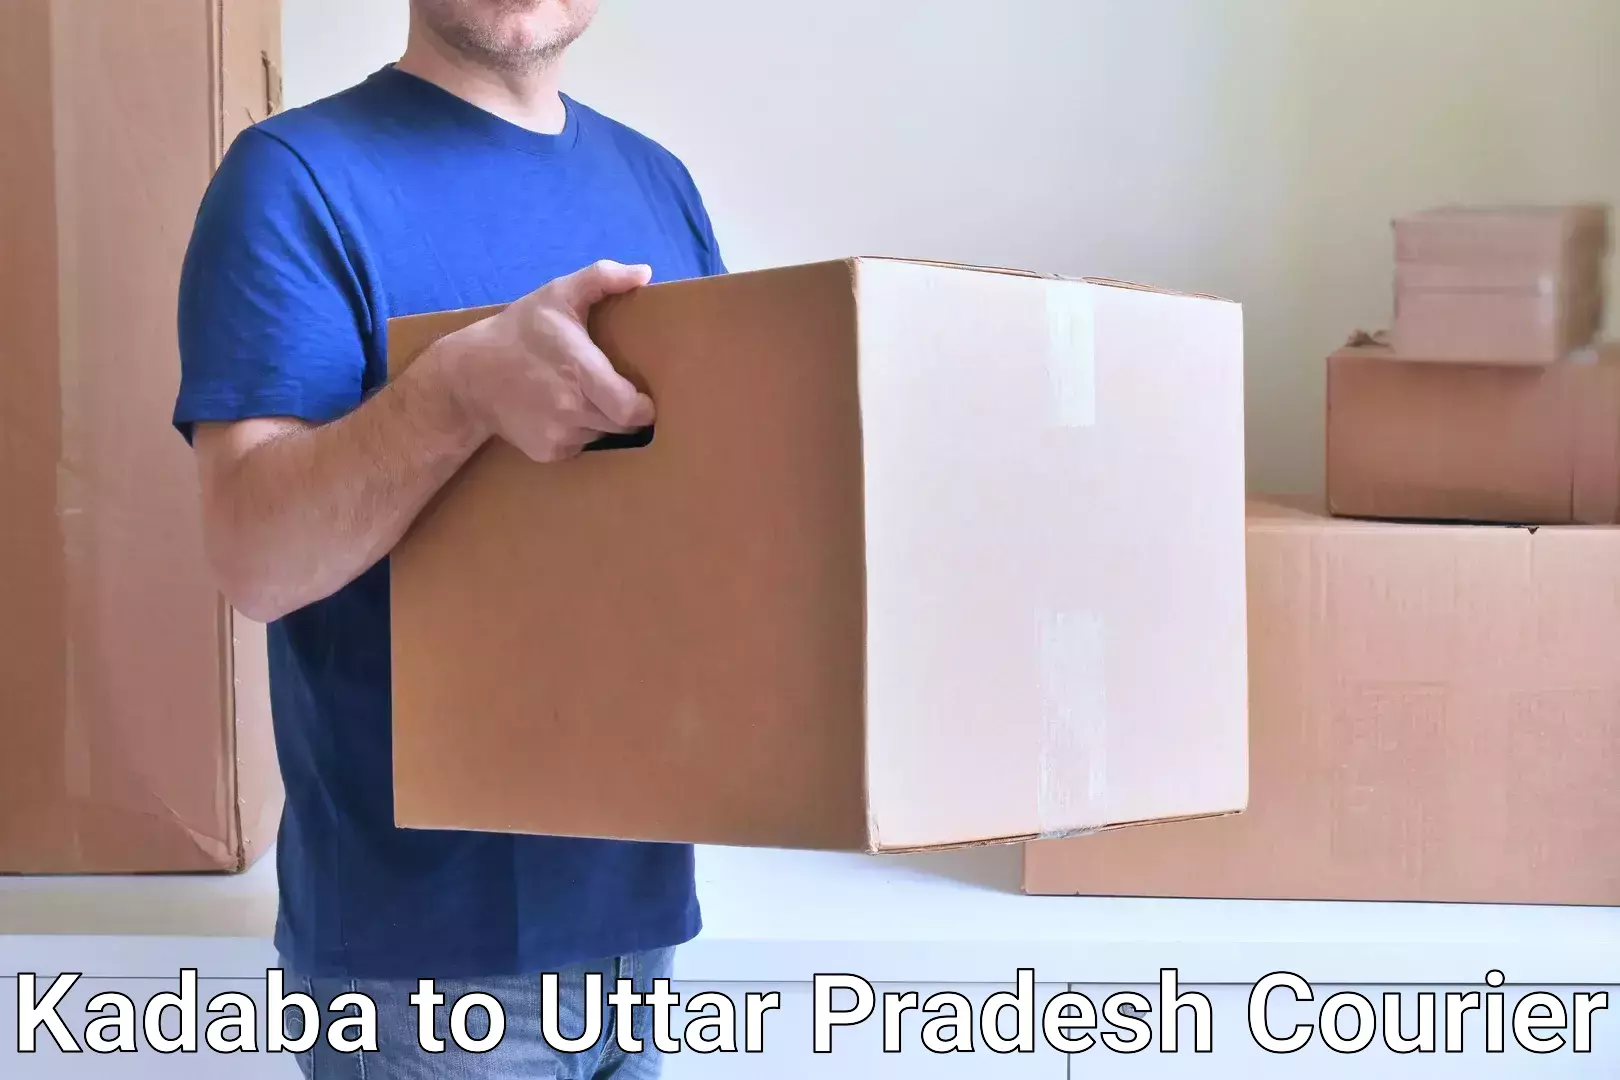 Efficient package consolidation Kadaba to Allahabad